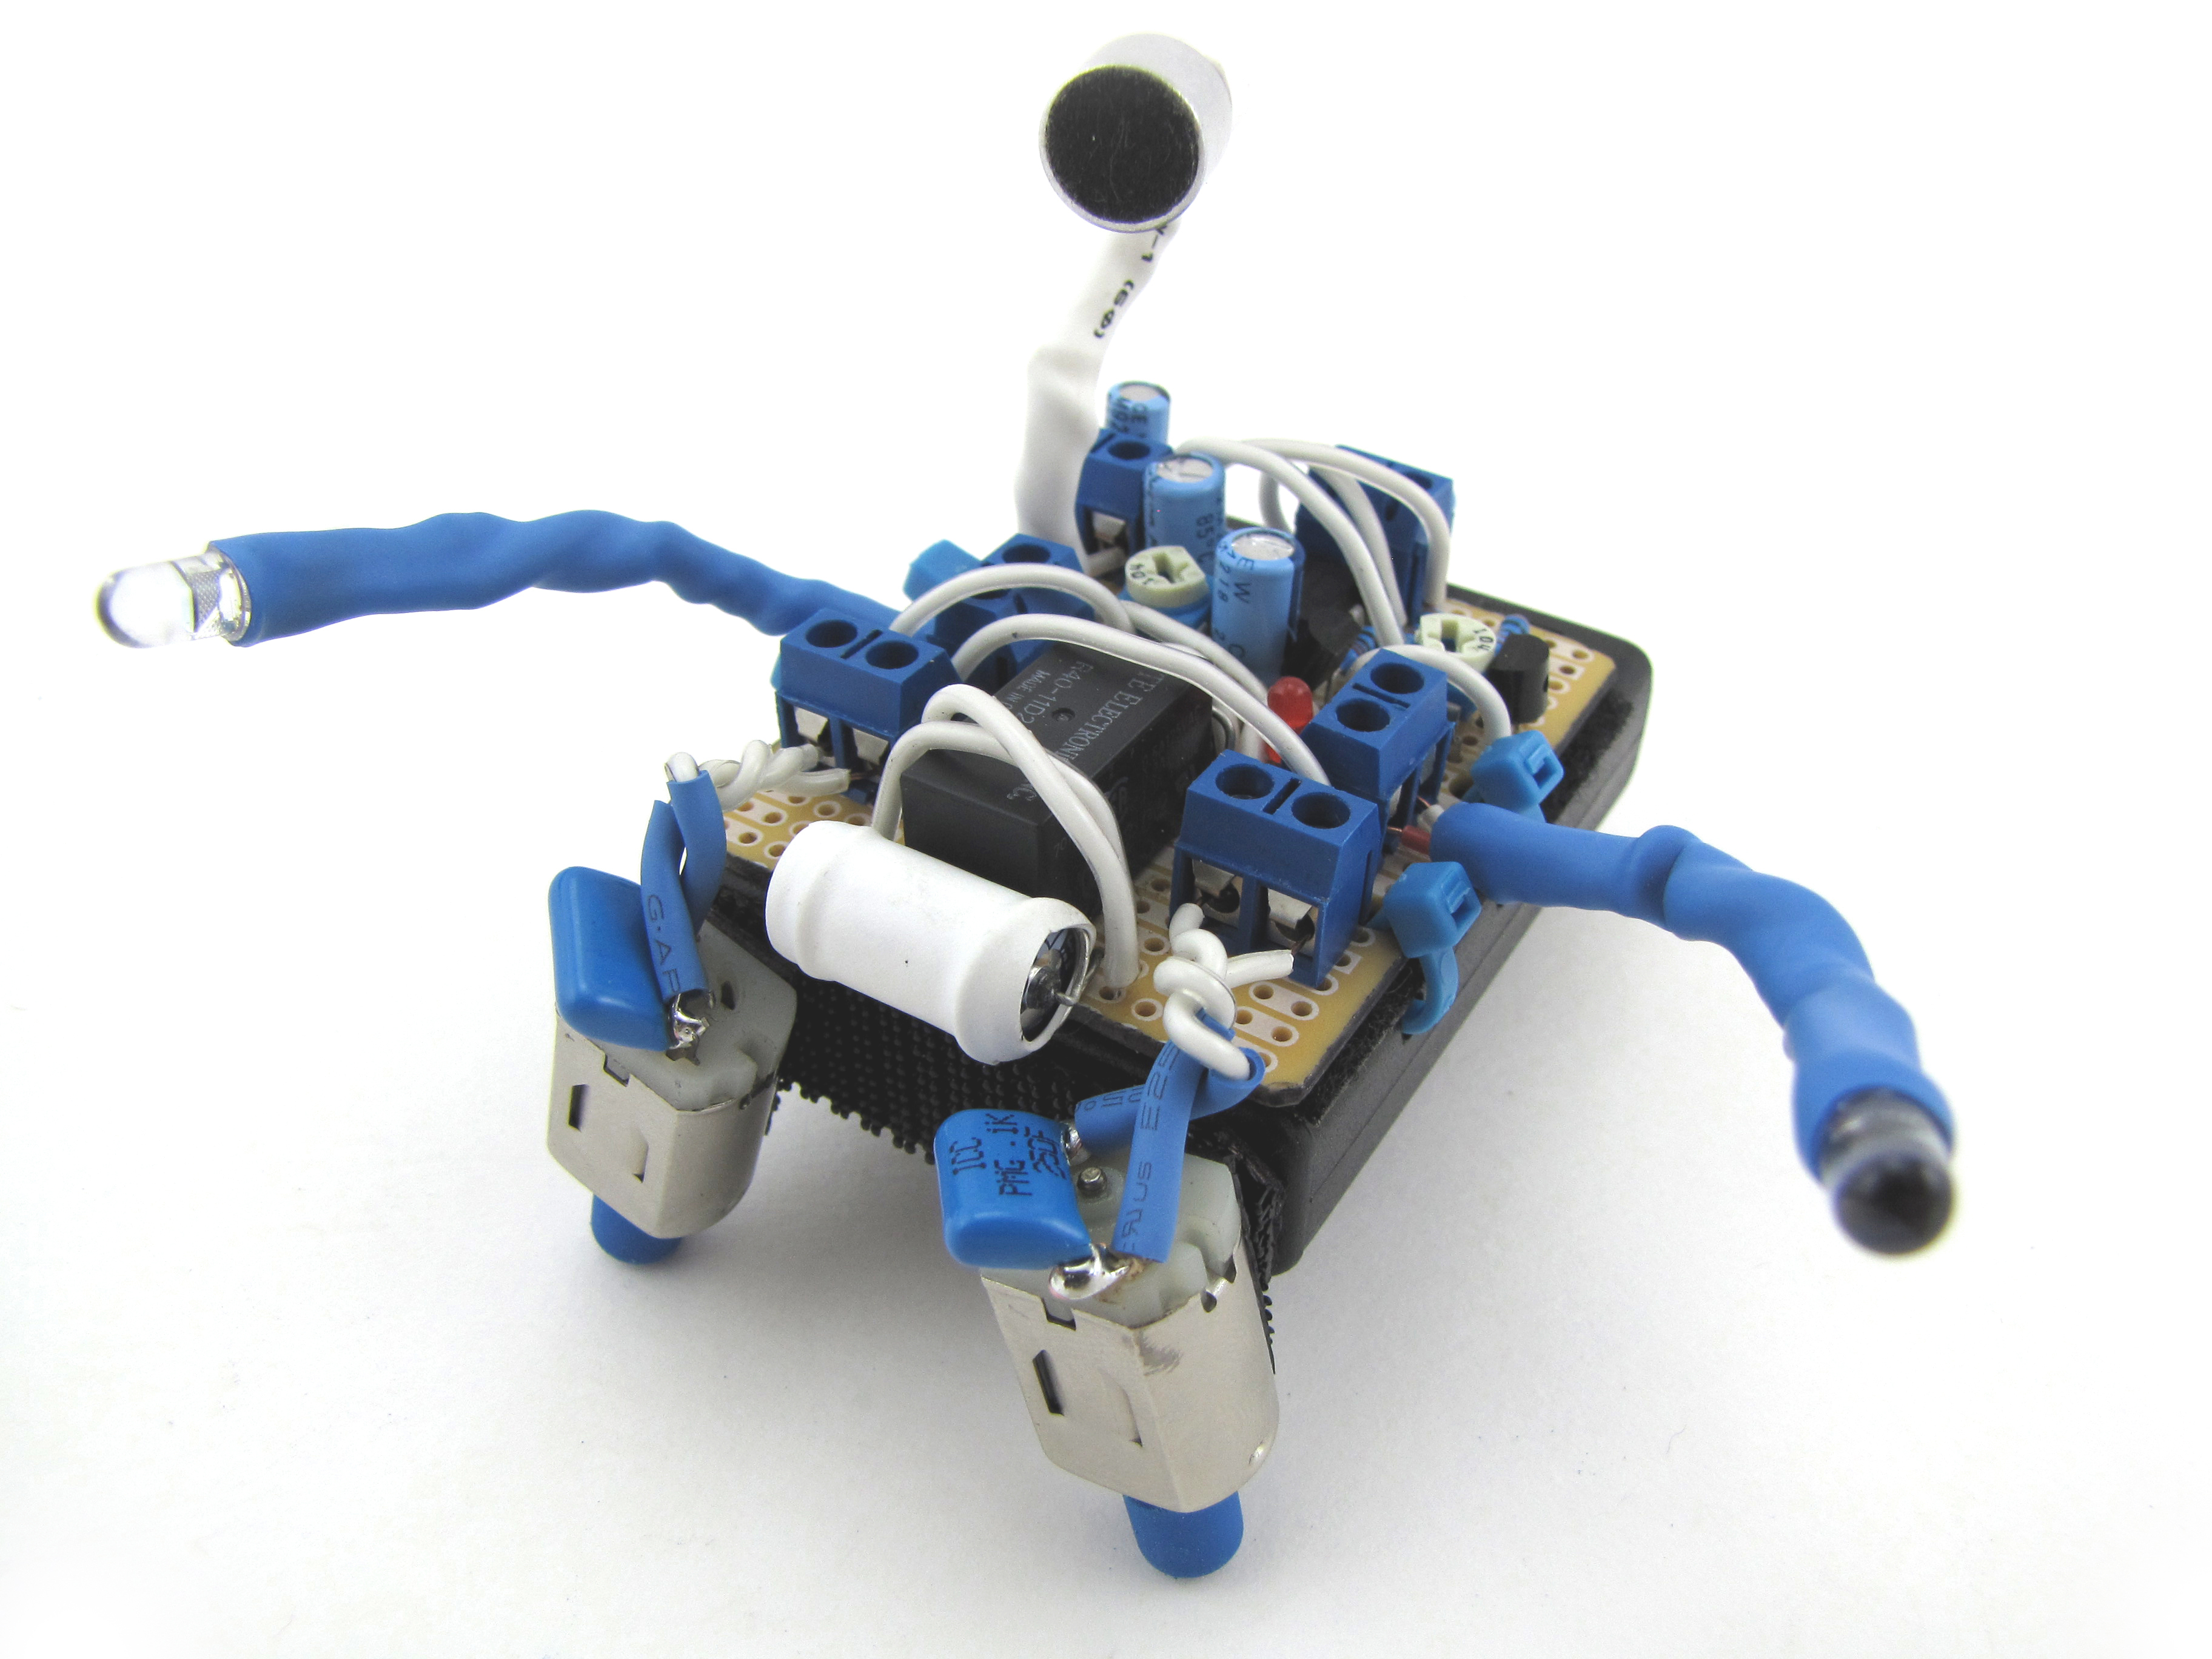 An elaborate but small hand-assembled BEAM style robot with carefullly coordinated colors in blue and white.